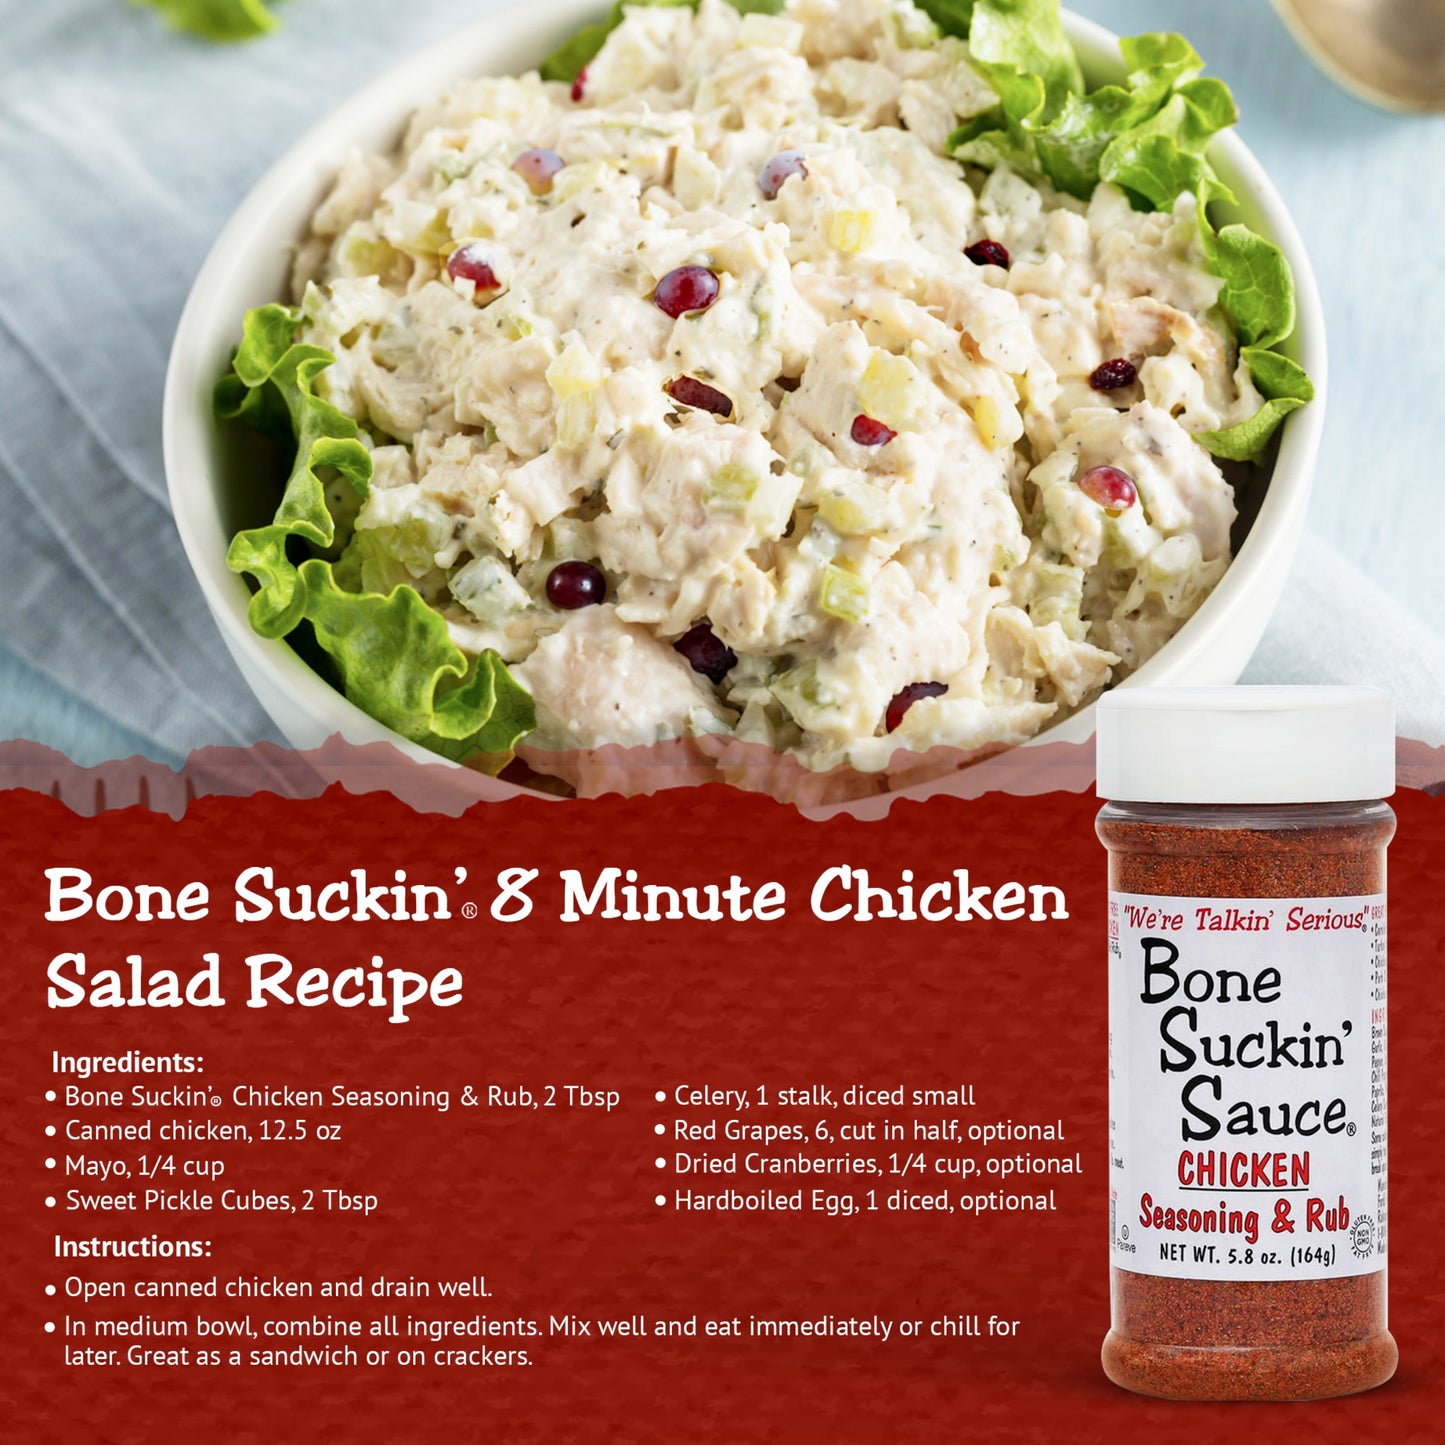 Bone Suckin' 8 Minute Chicken Salad Recipe Ingredients: Bone Suckin' Chicken Seasoning & Rub, 2 Tbsp, Canned Chicken, 12.5 oz, Mayo, 1/4 cup, Sweet PIckle Cubes, 2 Tbsp, Celery, 1 stalk, diced small, Red Grapes, 6, cut in half, optional, Dried Cranberries, 1/4 cup, optional, Hardboiled Egg, 1 diced, optional. One canned chicken and drain well. In medium bowl, combine all ingredients. Mix well and eat immediately or chill for later. Great as a sandwich or on crackers.